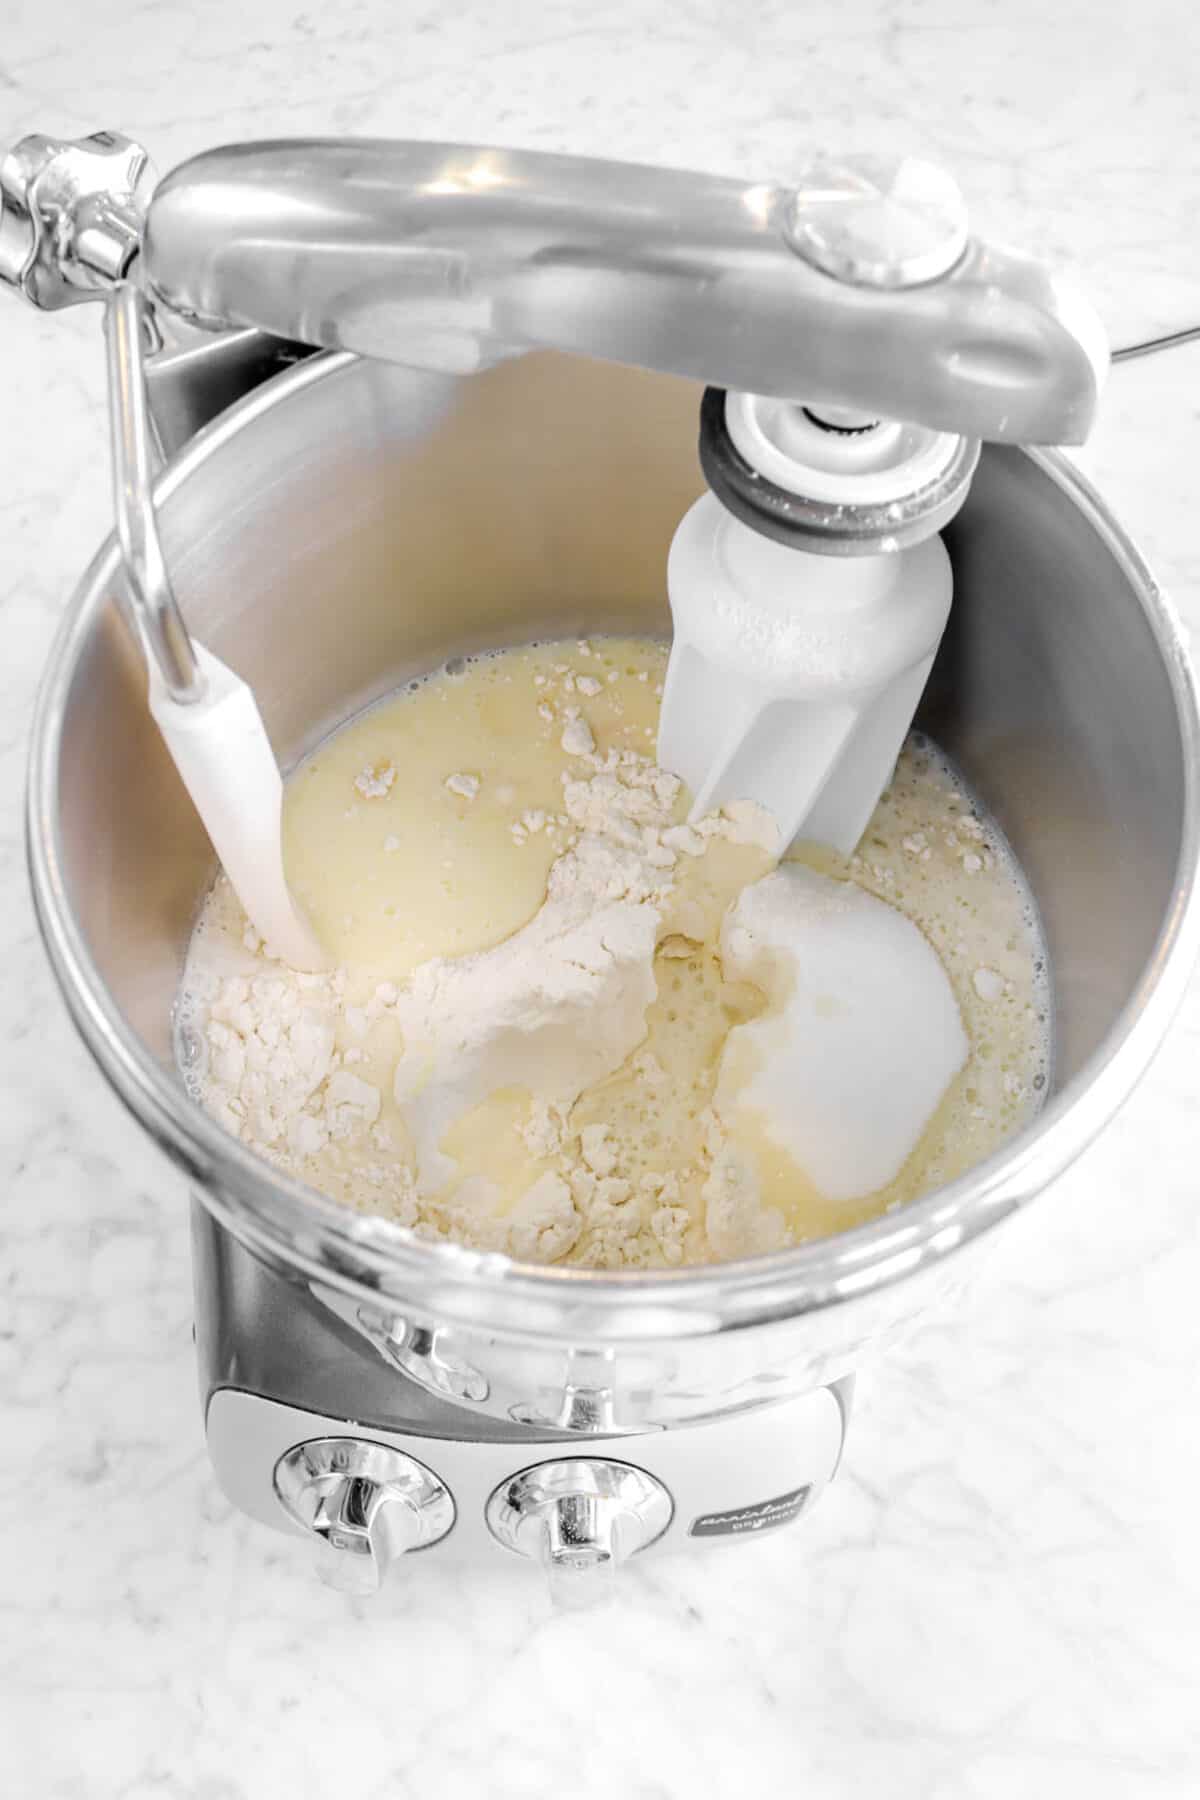 melted butter and milk mixture added to dry ingredients in mixer